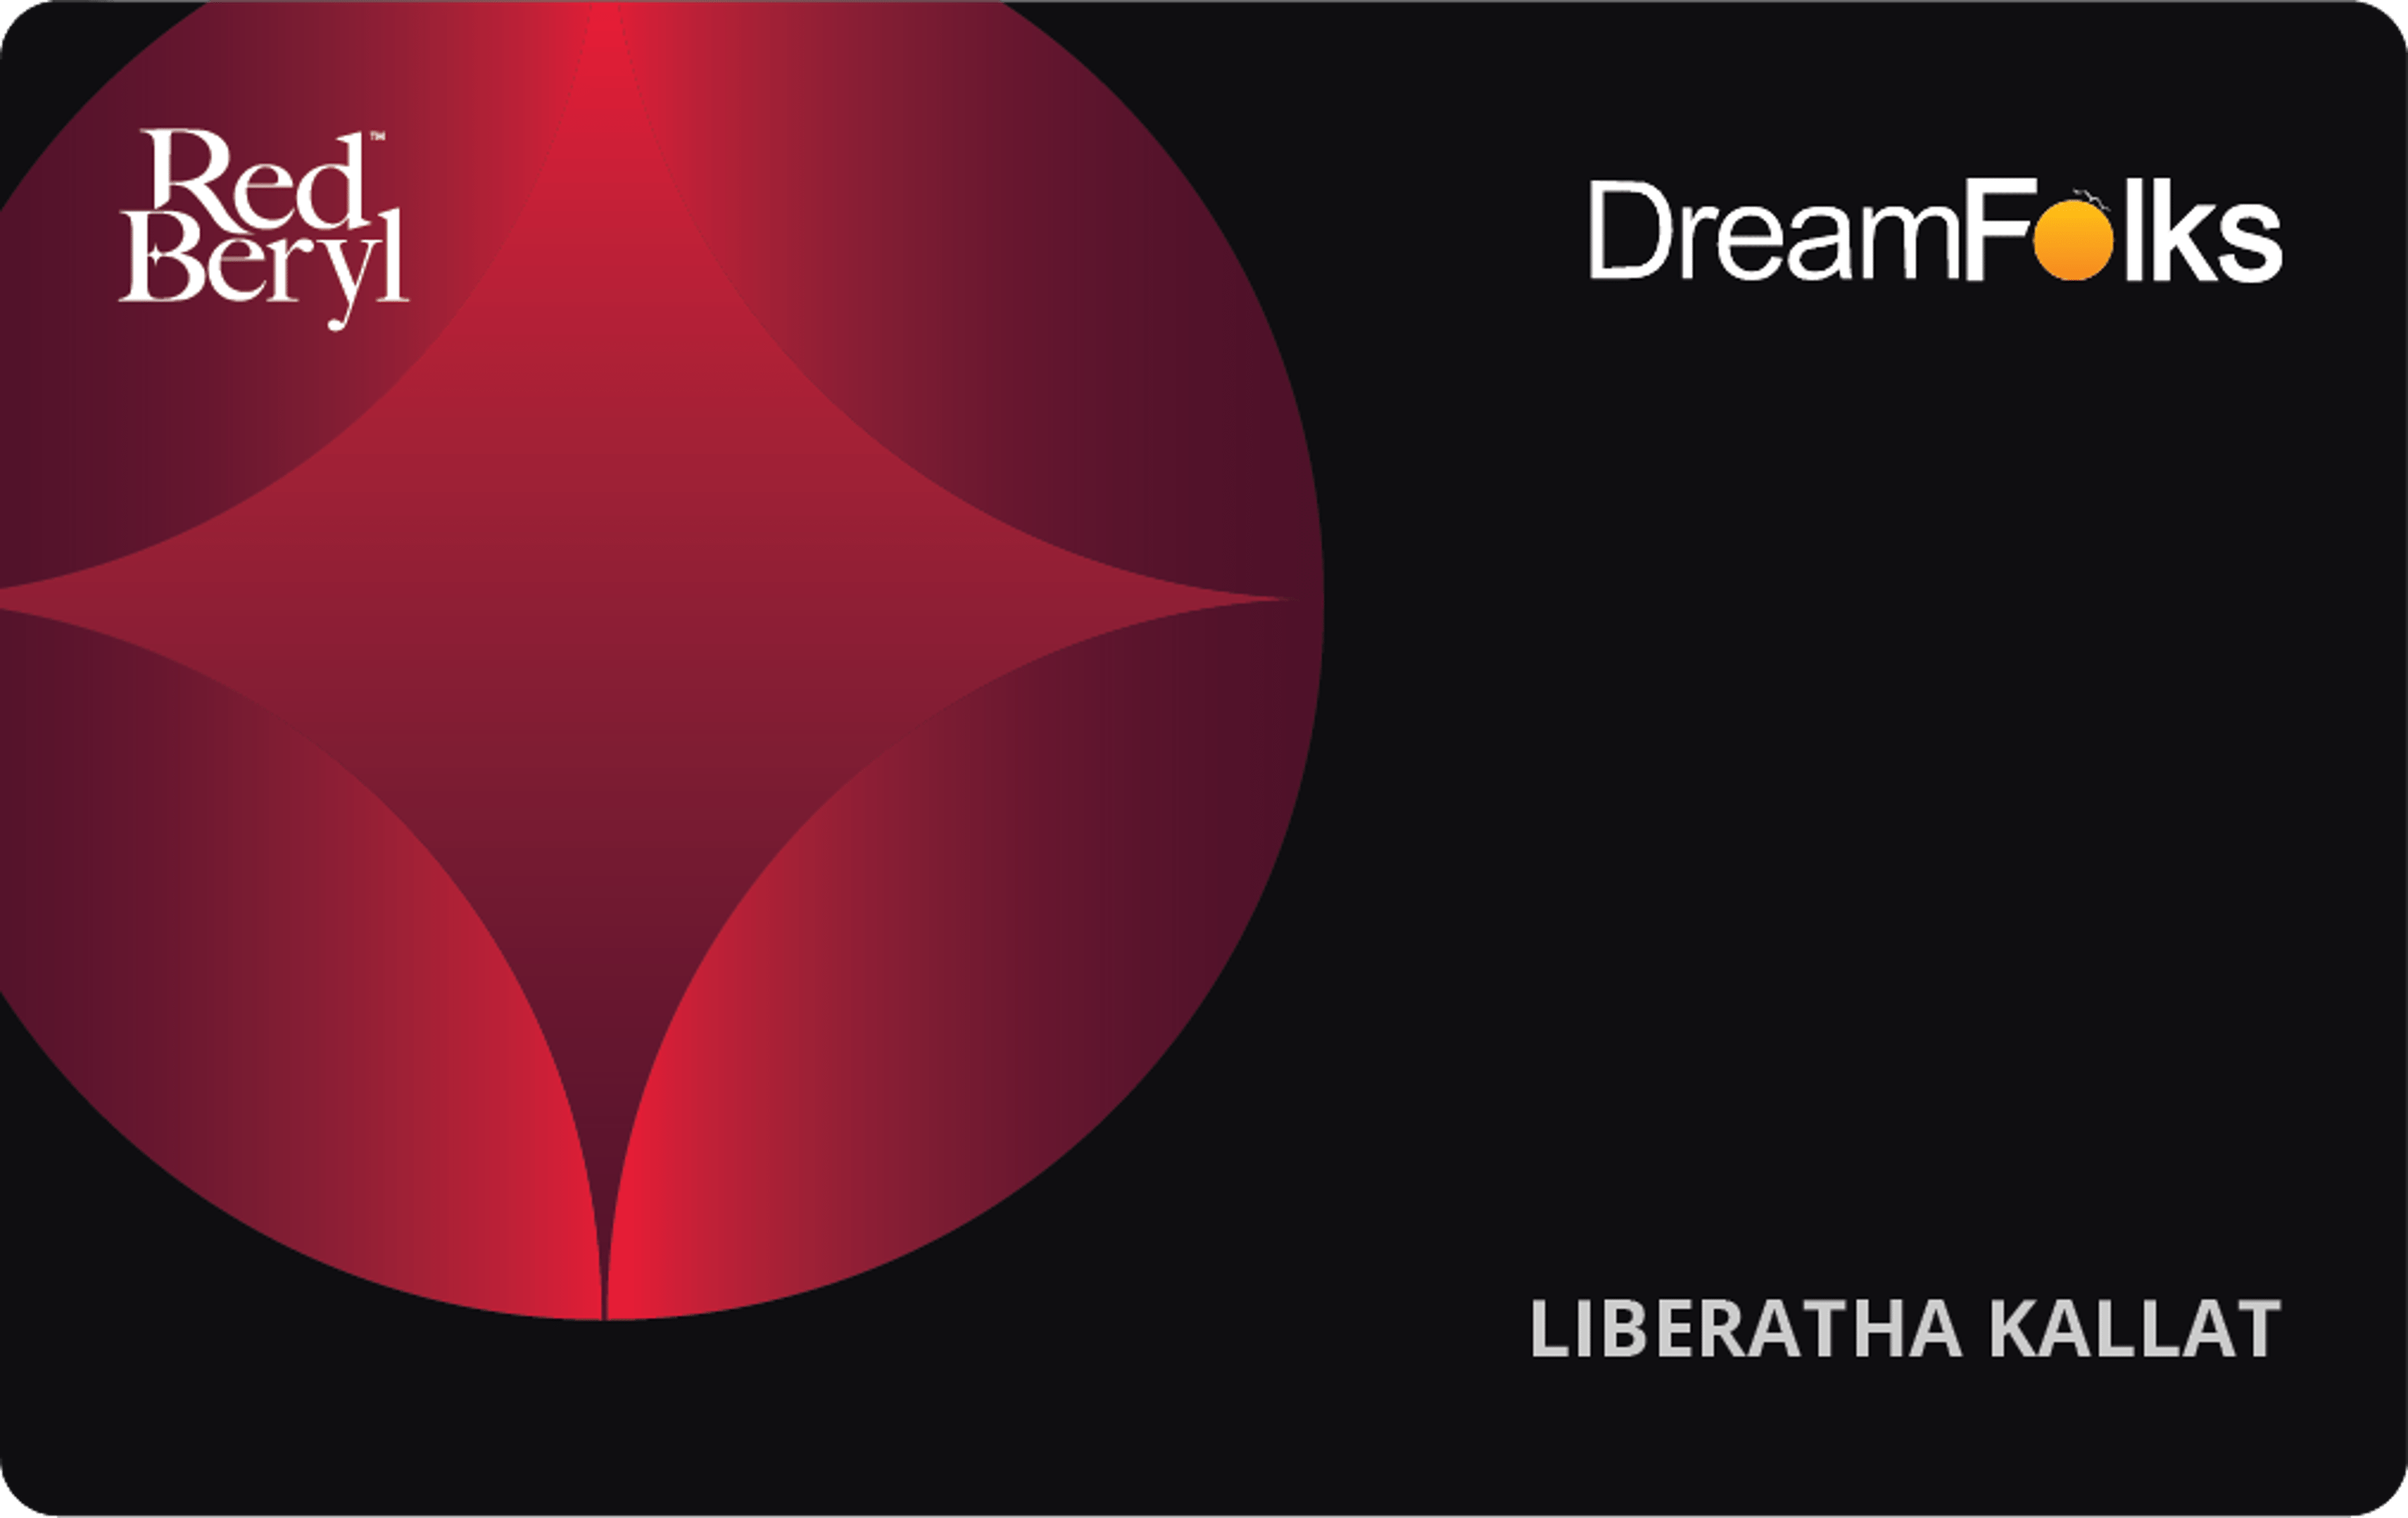 DreamFolks and RedBeryl forge a strategic partnership to provide ultra-luxury experiences